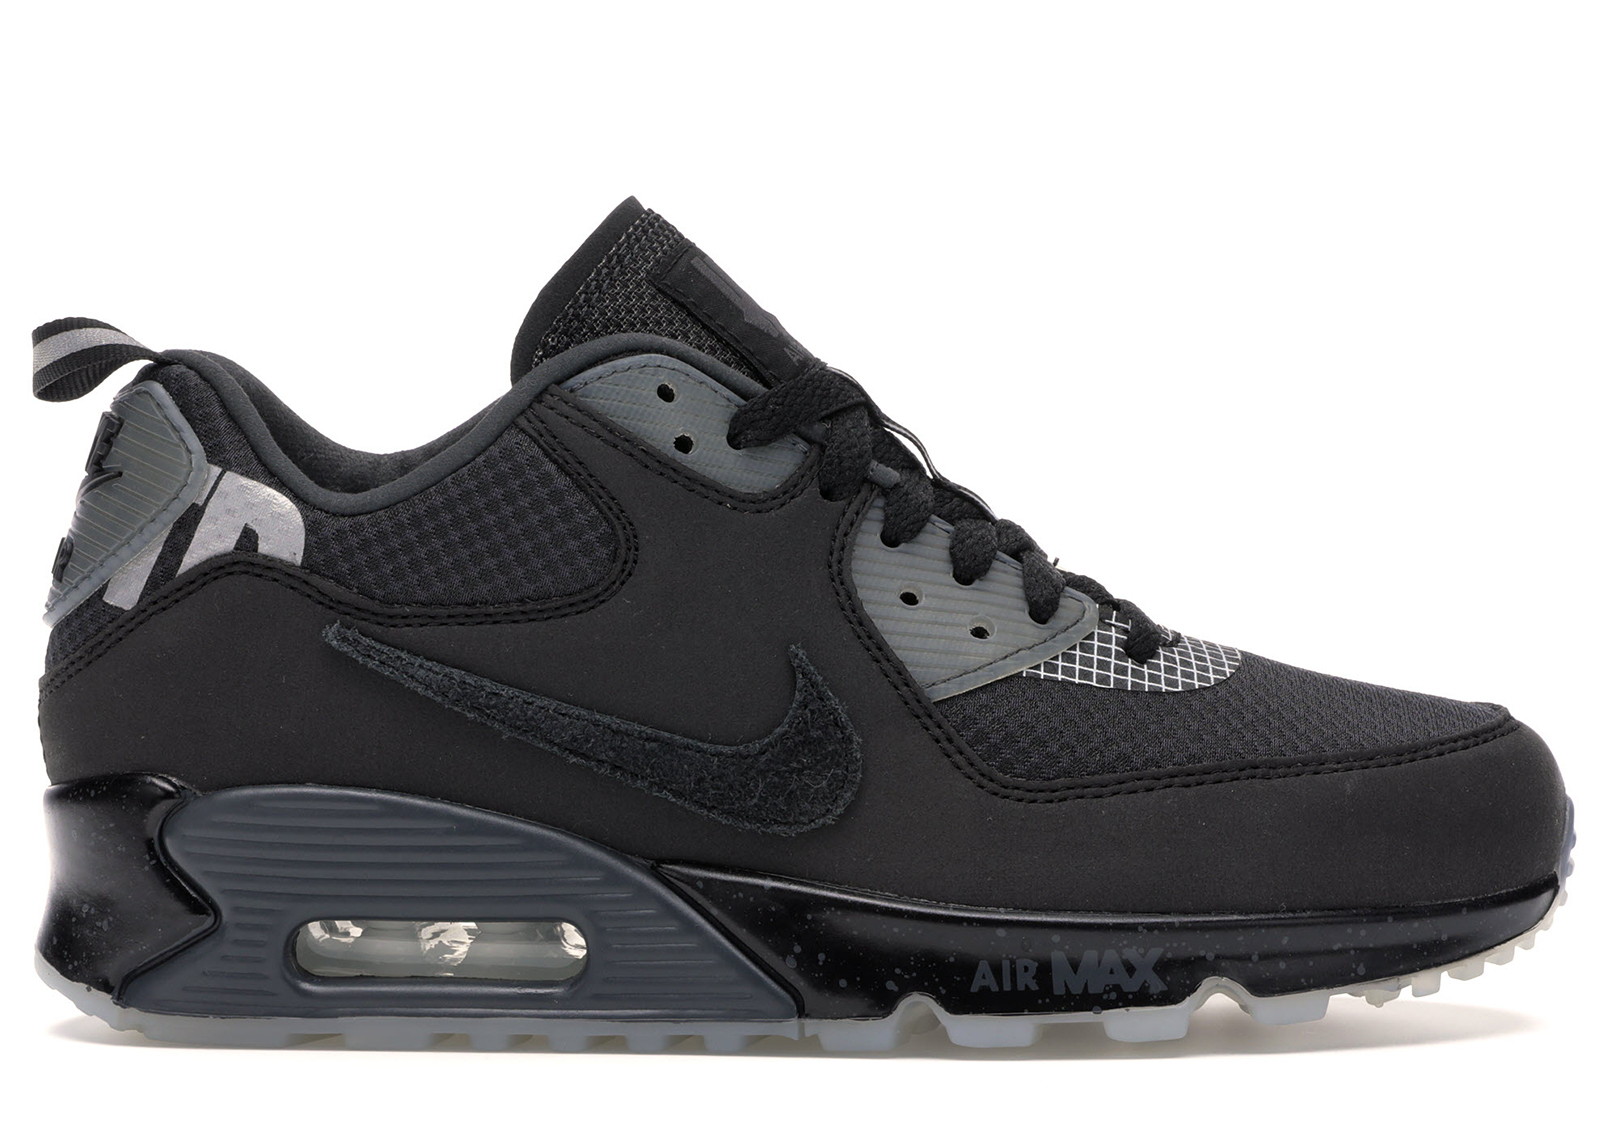 Nike Air Max 90 20 Undefeated Black